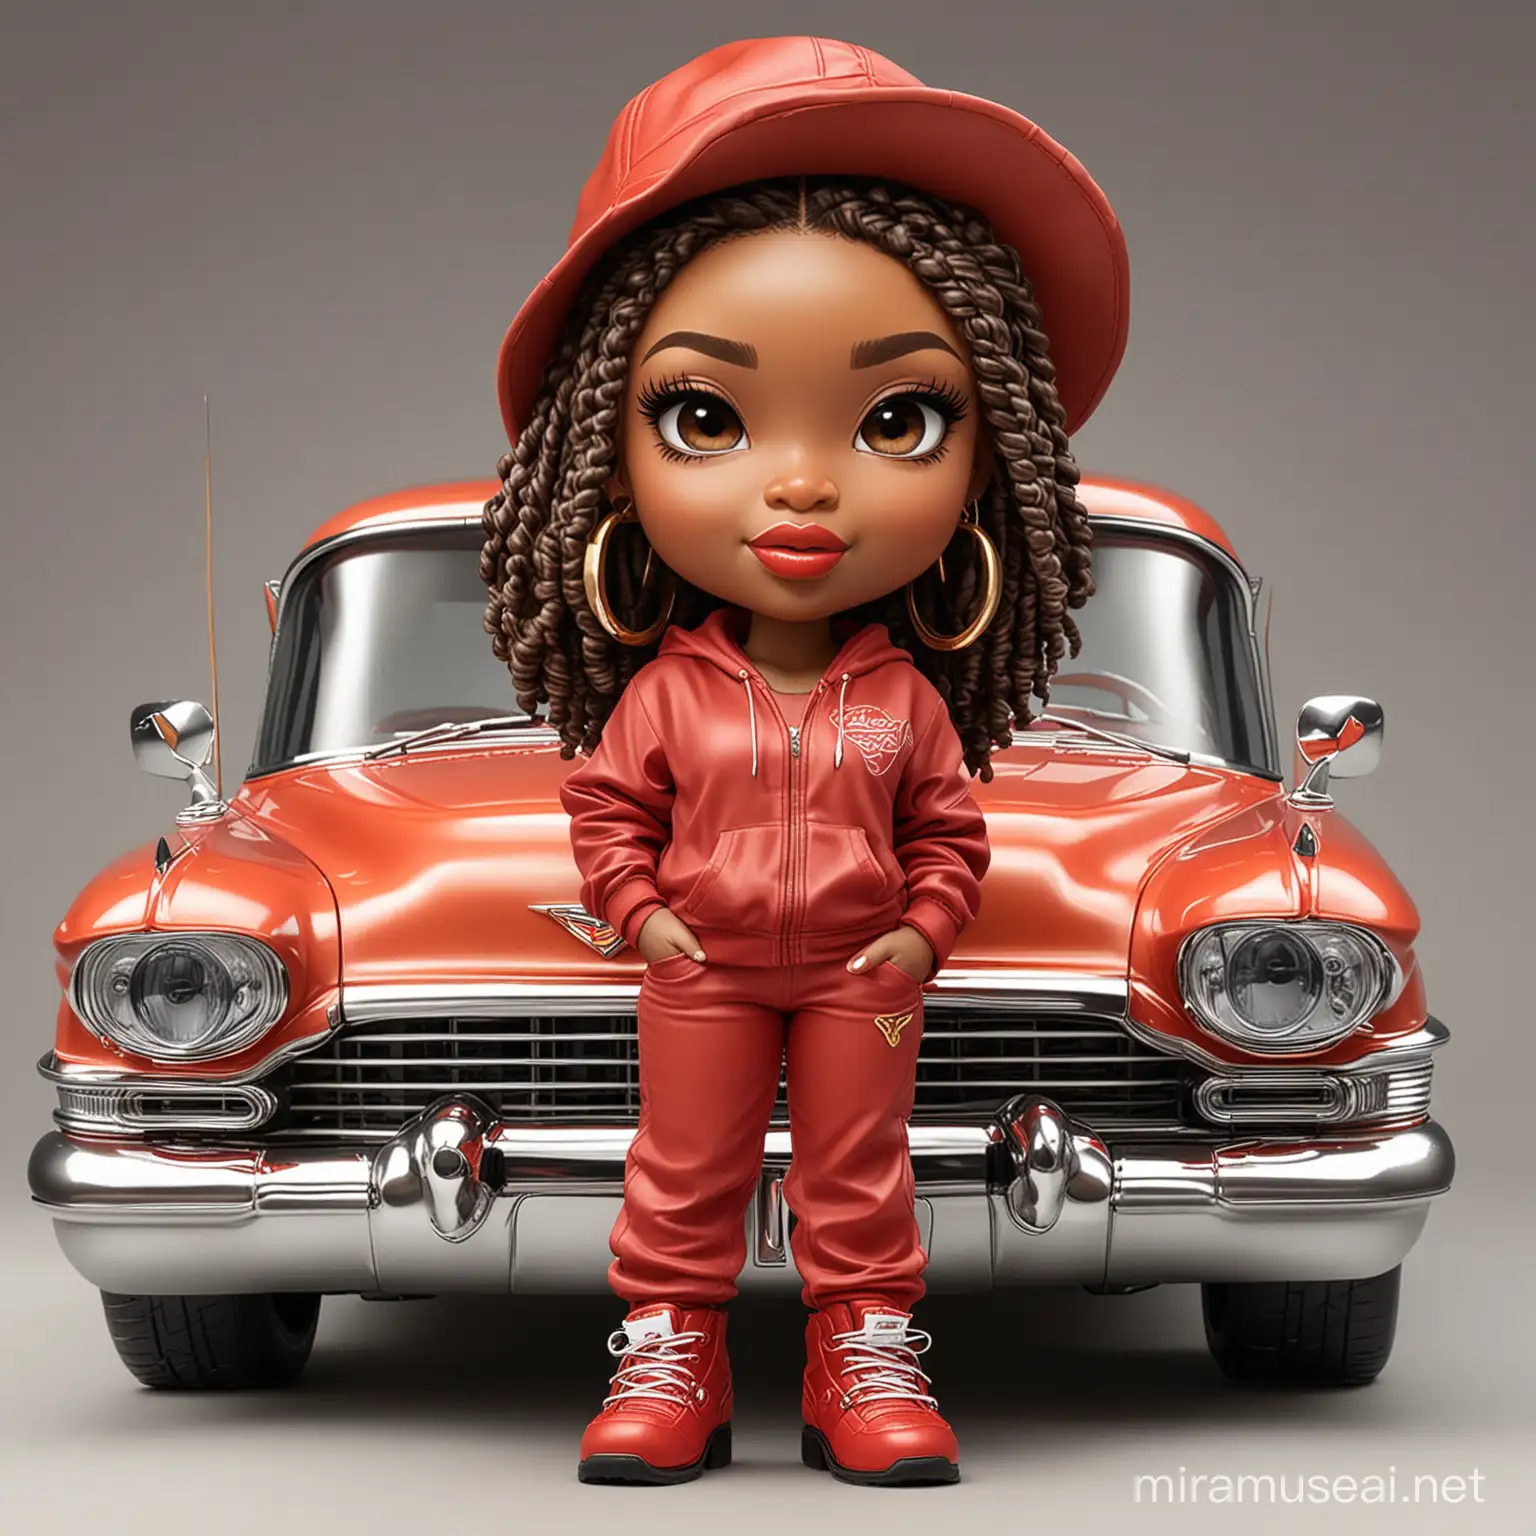 Stylish Chibi Woman with Cellphone Leaning on Red 1952 Cadillac